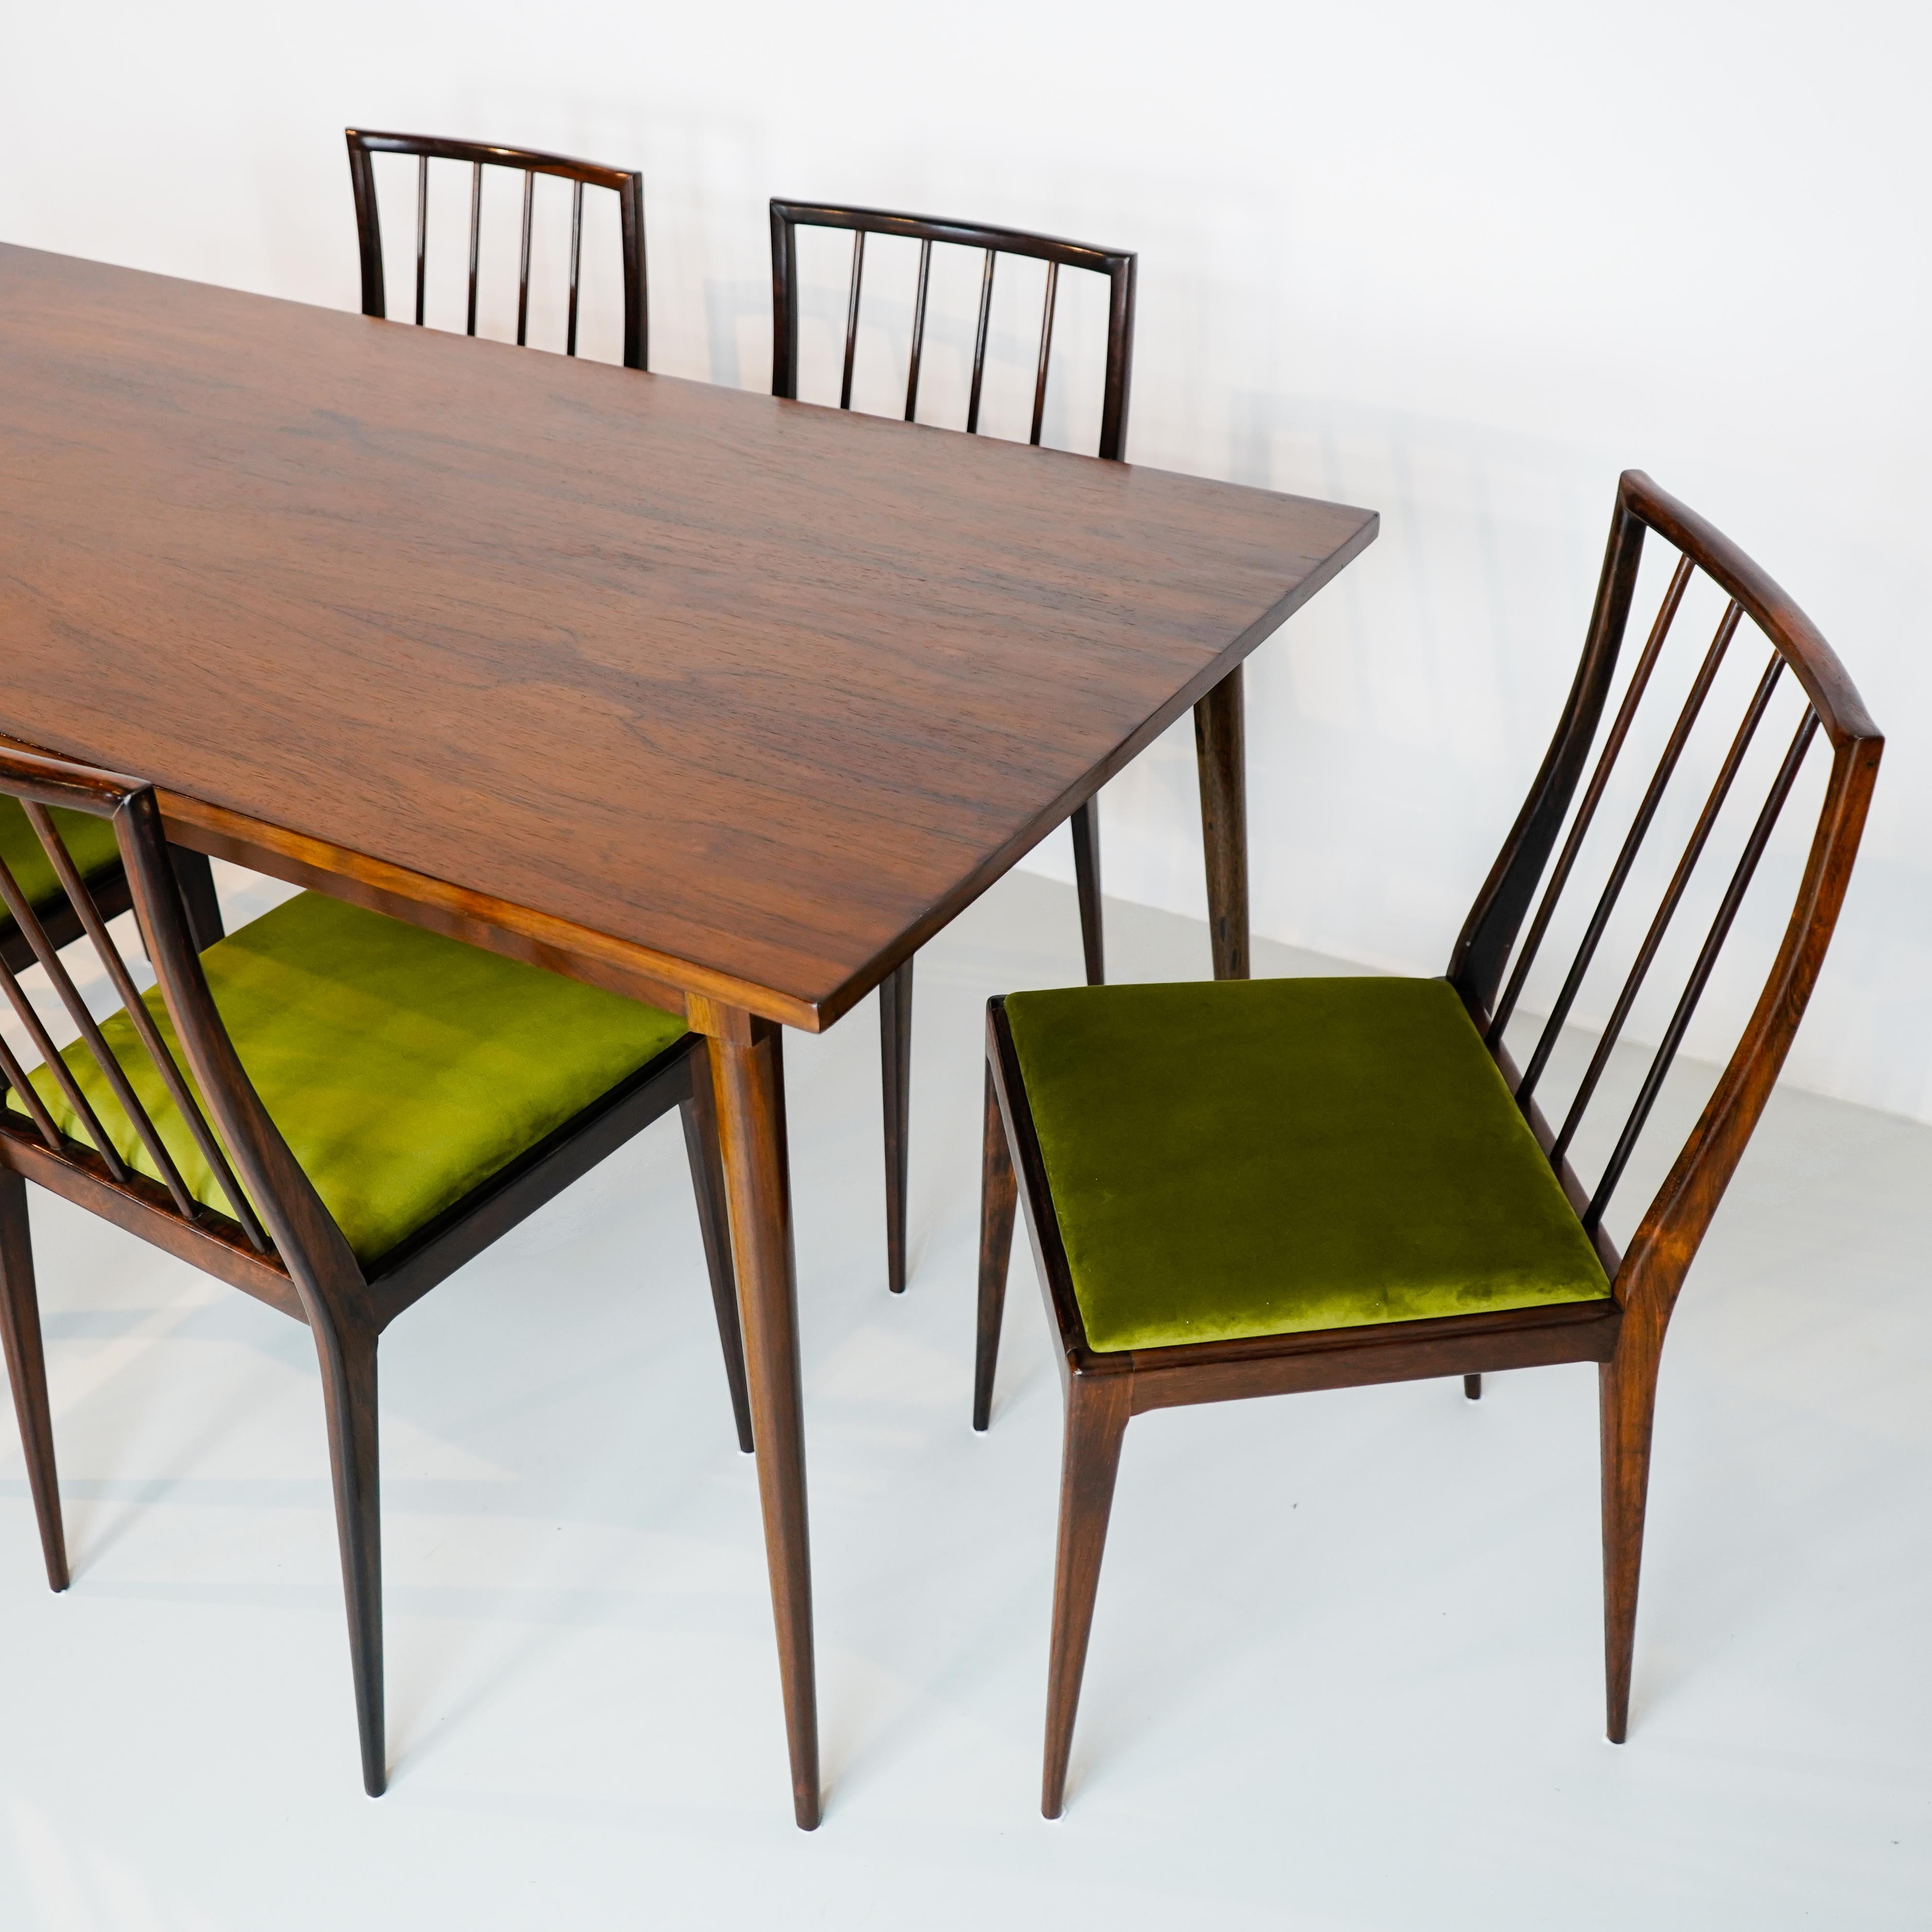 GB01 RIPAS - 6 chairs and sealed table in Rosewood, Geraldo de Barro Unilabor For Sale 7